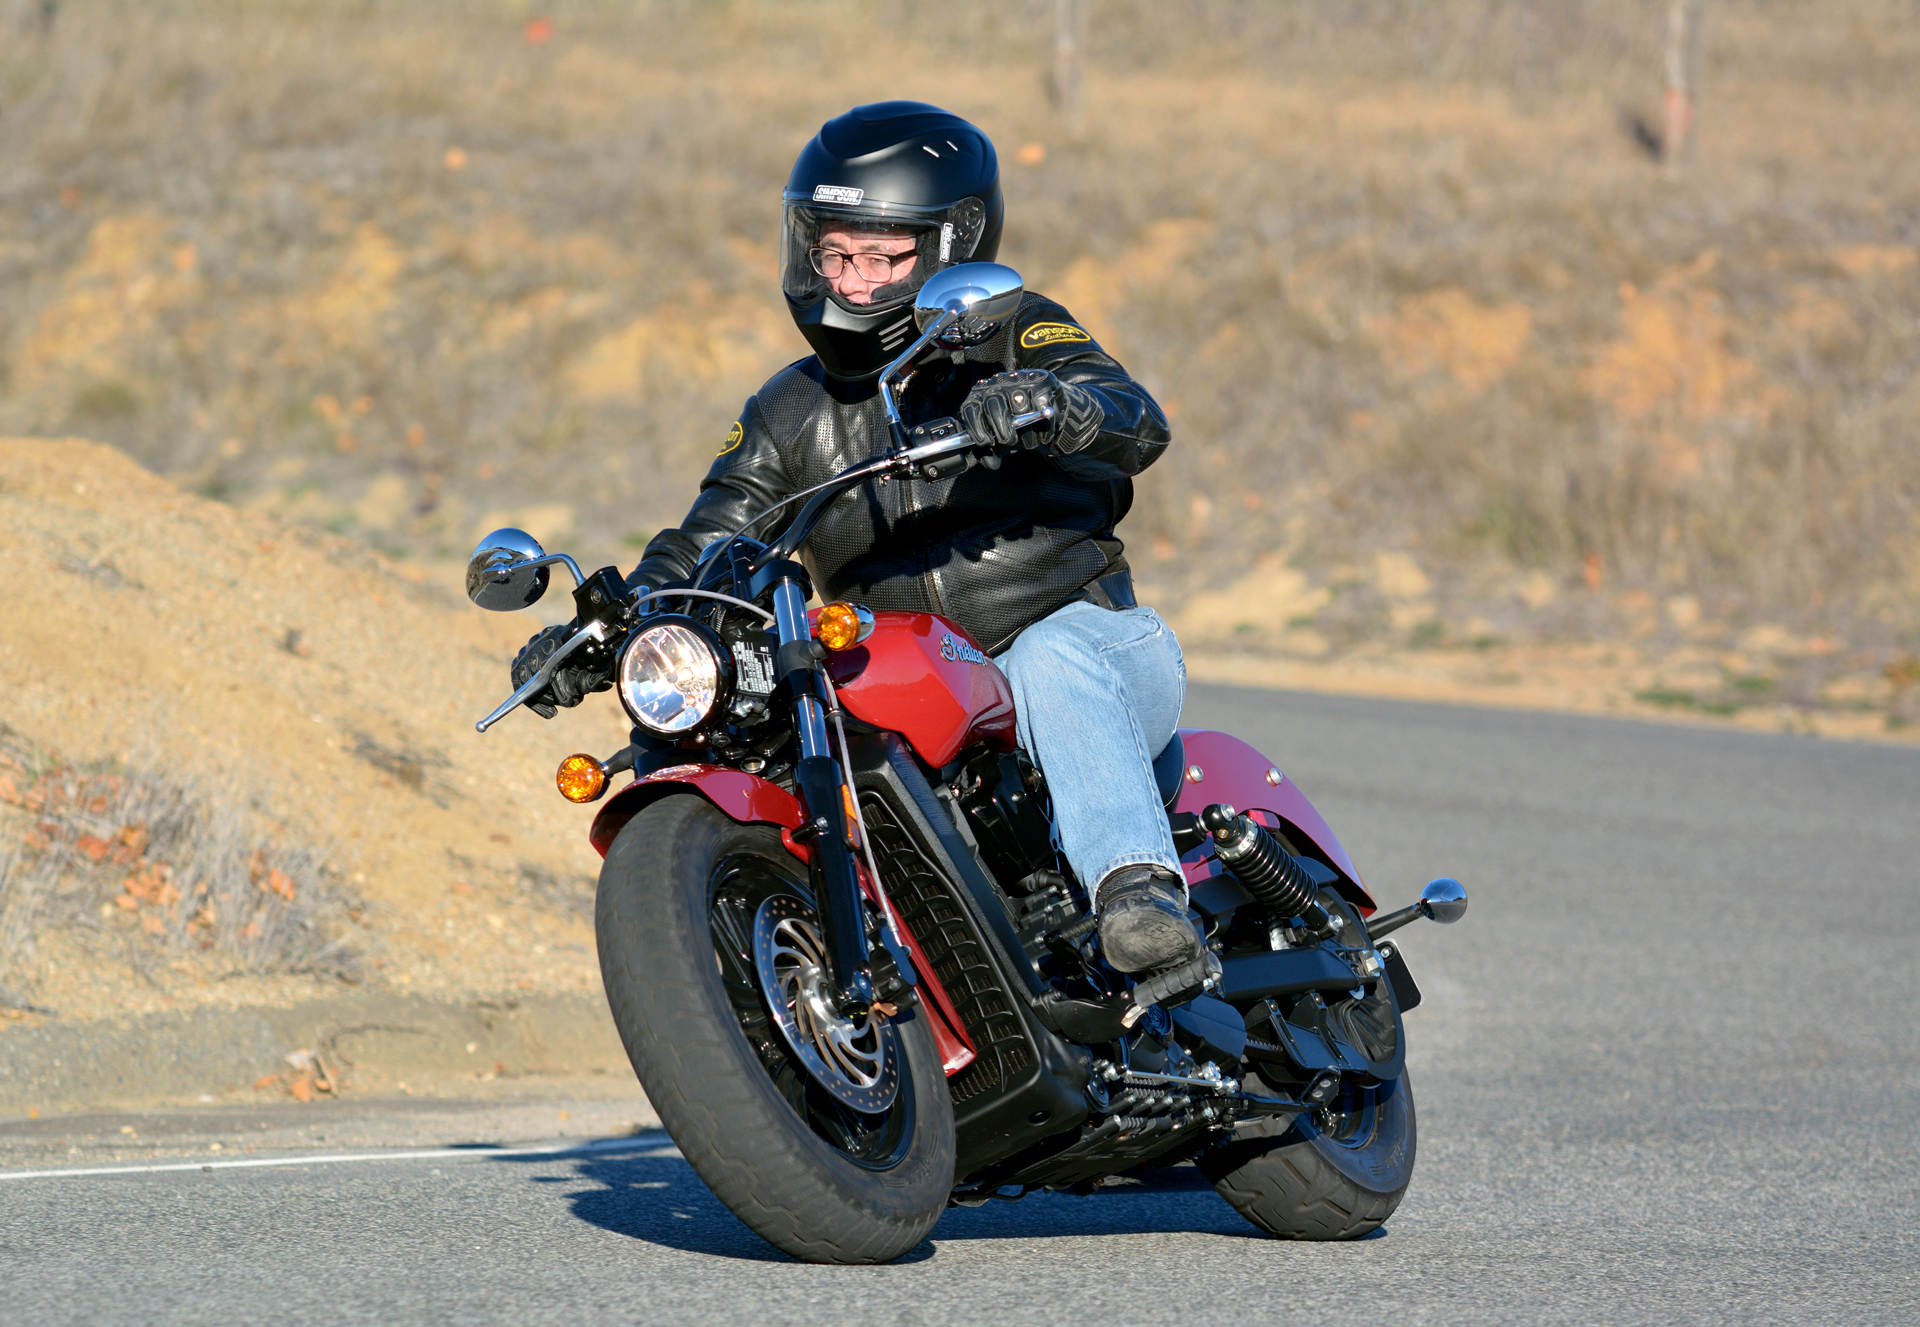 2016 Indian Scout Sixty: MD Ride Review, Part 2 « MotorcycleDaily.com ...